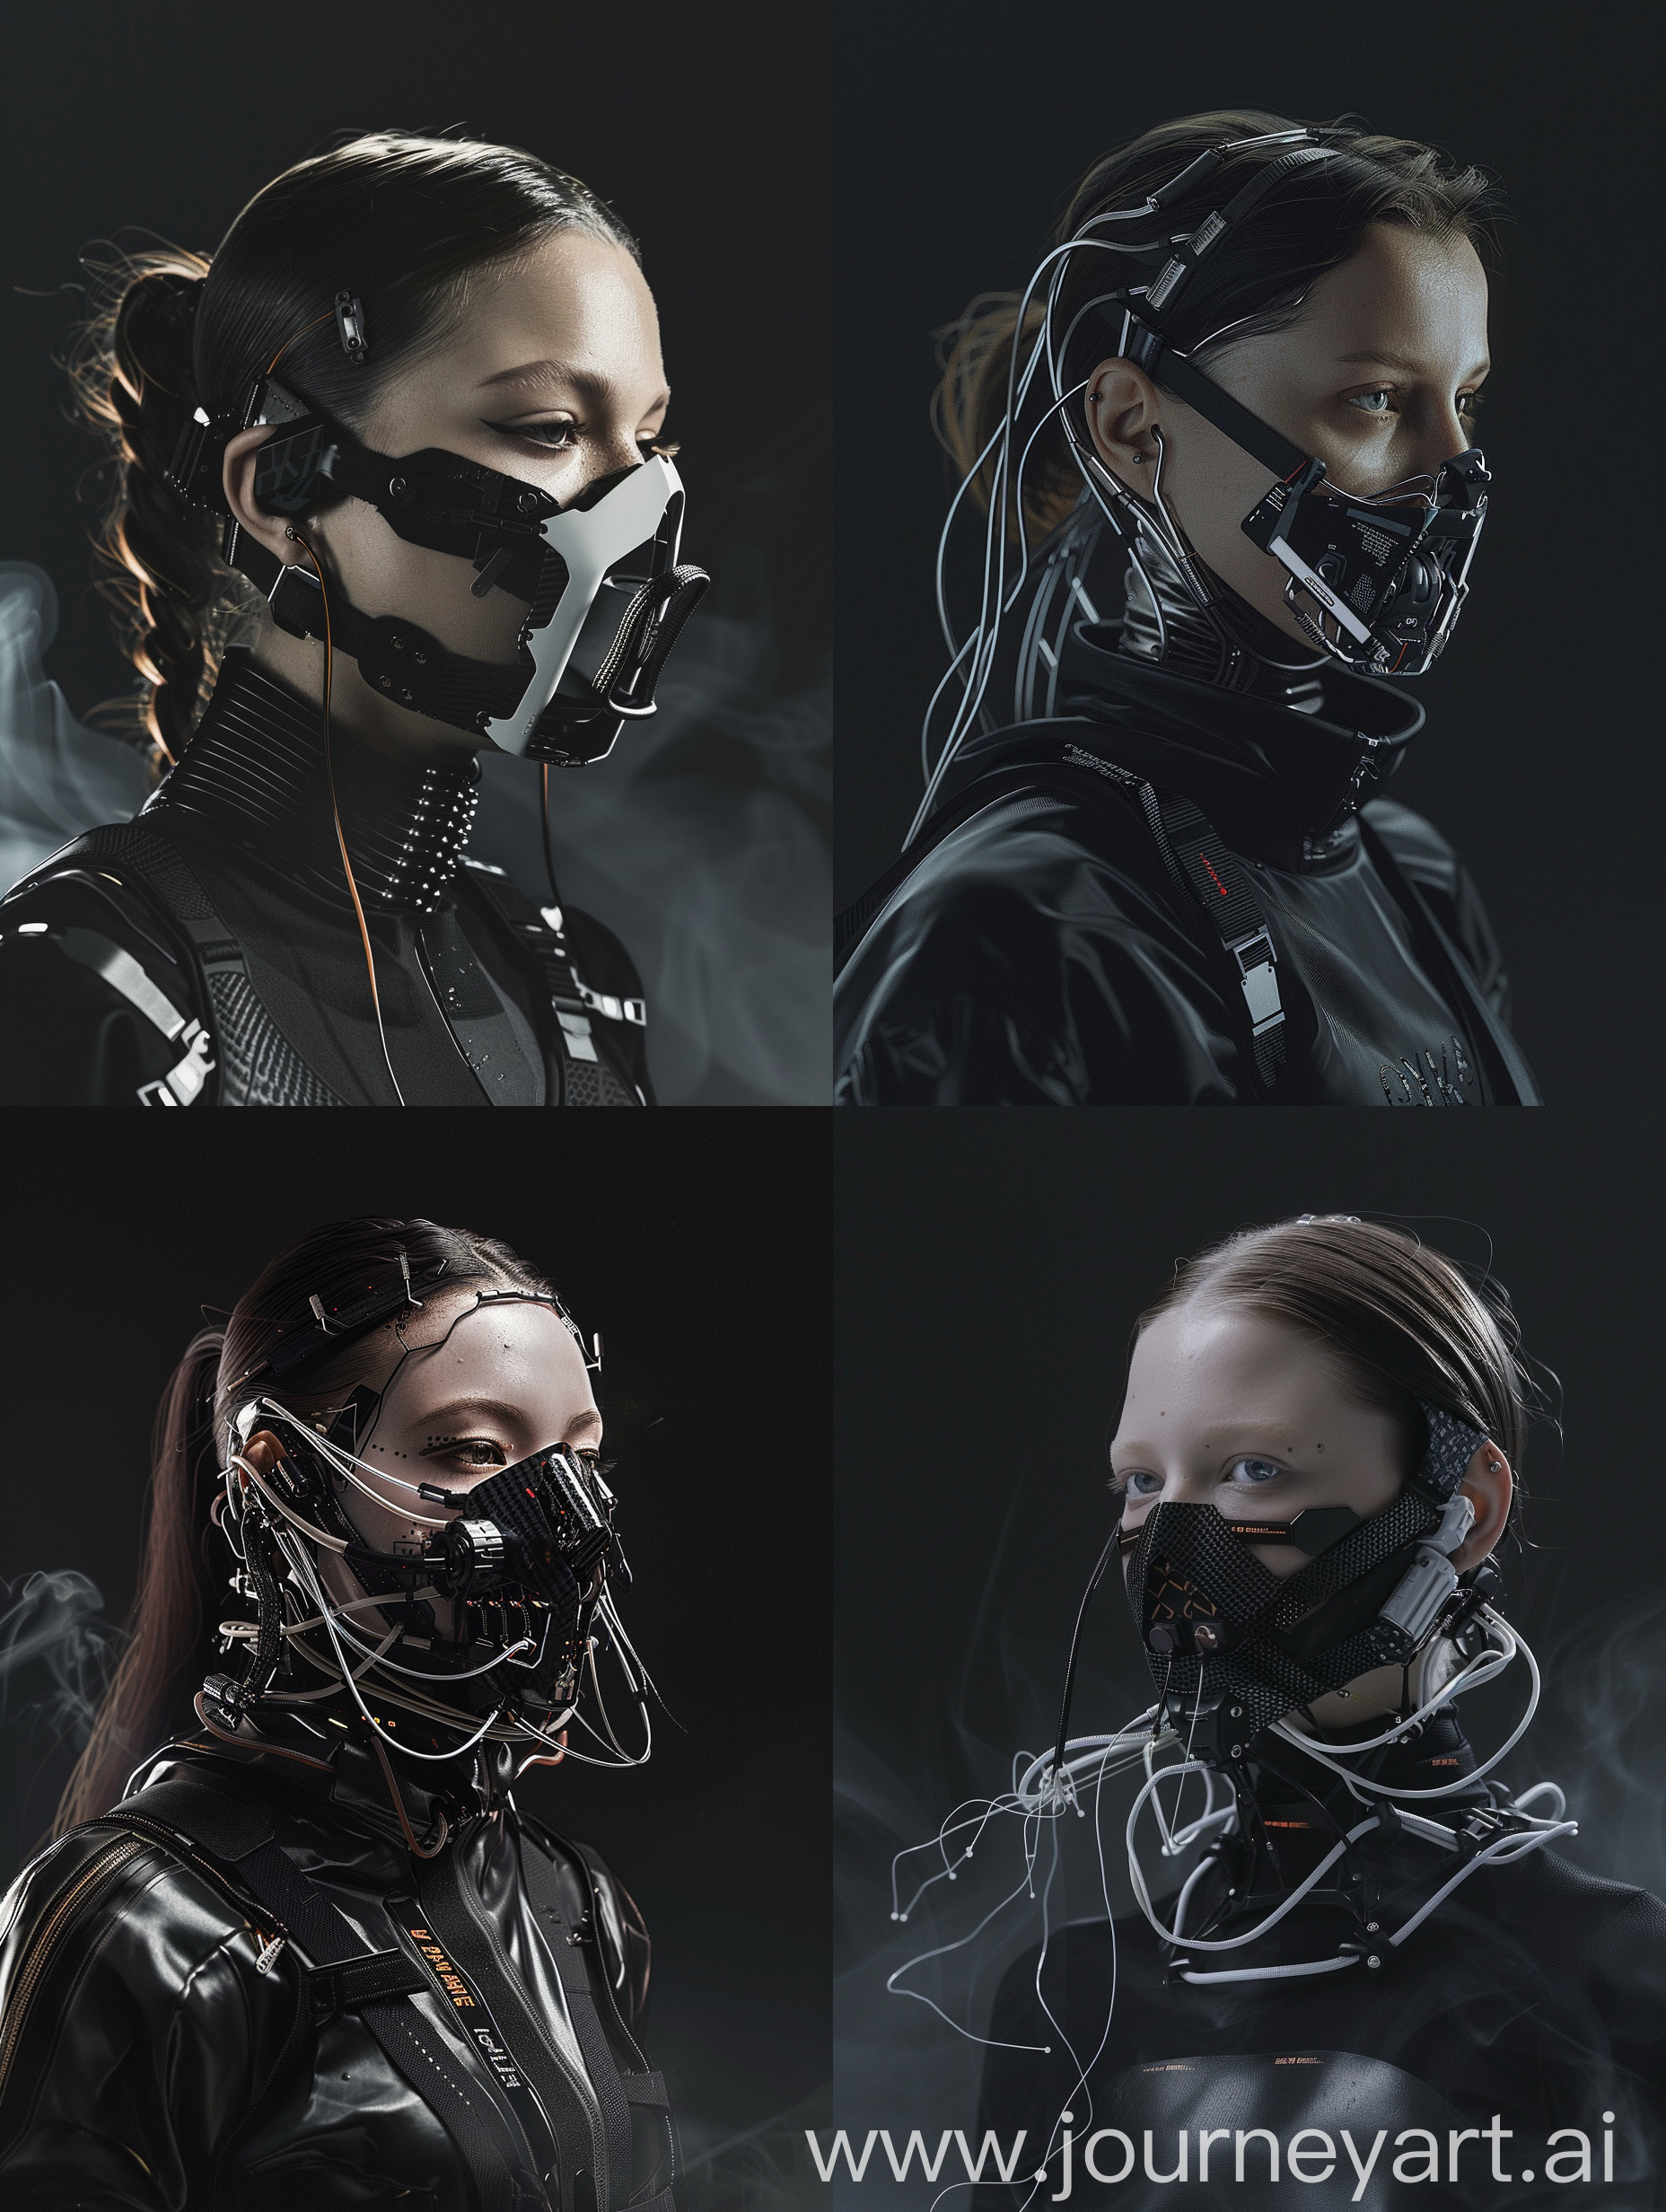 Against a sleek black backdrop, witness the captivating presence of a Beautiful characther adorned with a cybernetic mouth-covering mask. It seamlessly merges cutting-edge technology with intricate details, showcasing carbon fiber textures, sleek aluminum accents, and pulsating wires. Symbolizing the delicate equilibrium between humanity and machine, her appearance embodies the essence of a futuristic cyberpunk aesthetic, further accentuated by Off-White-inspired add-ons. With dynamic movements reminiscent of action-packed film sequences, accompanied by cinematic haze and an electric energy, she exudes an irresistible allure that commands attention